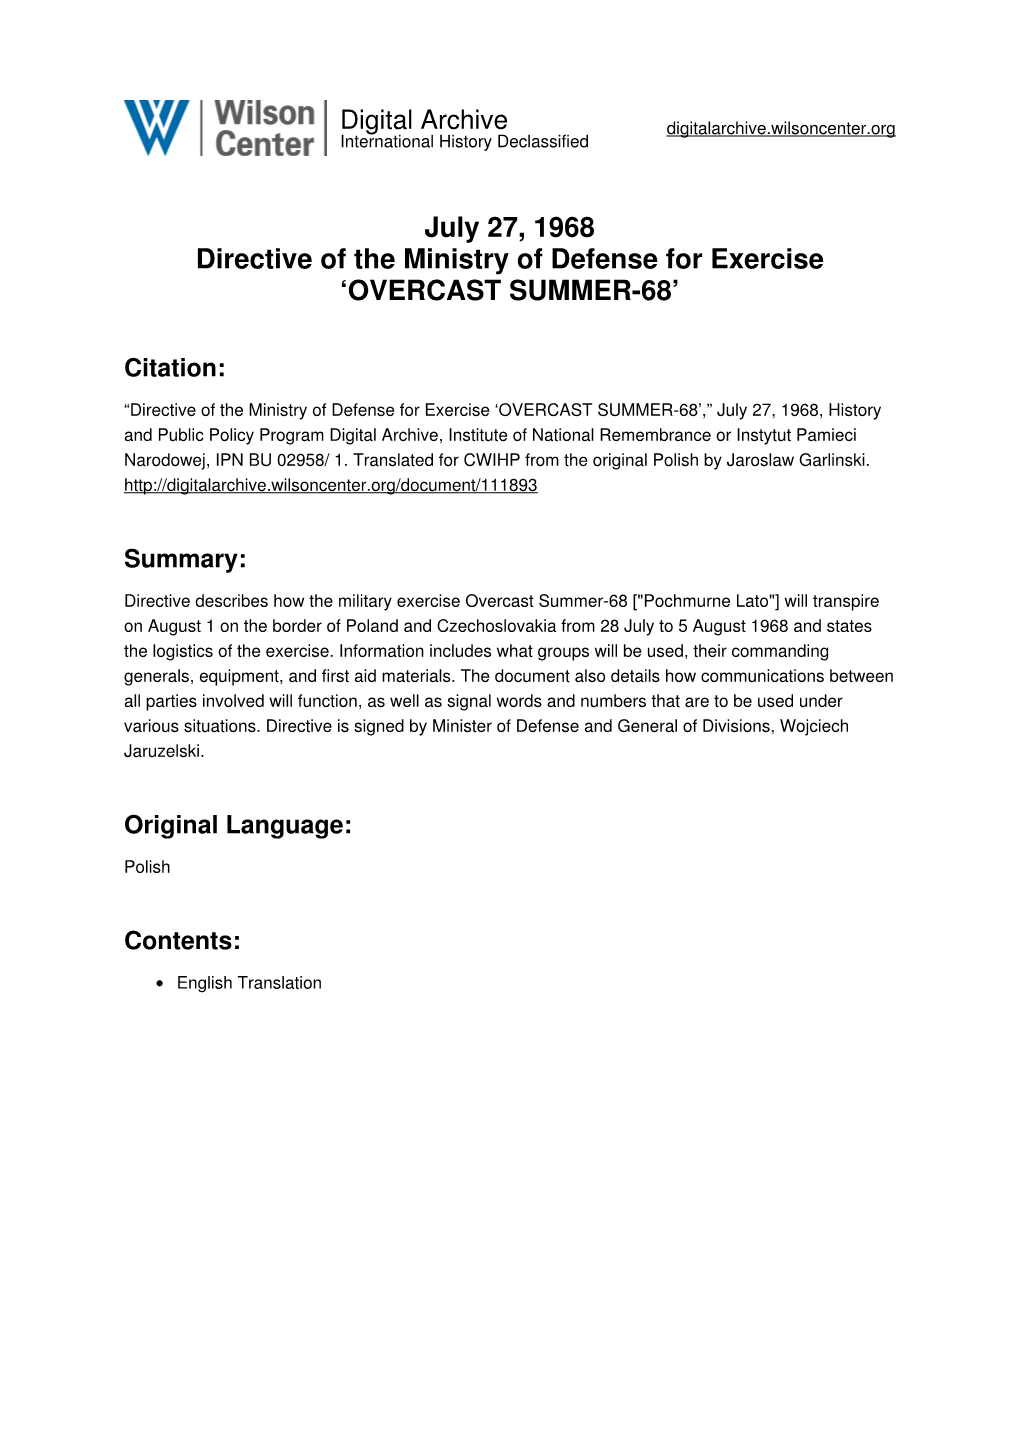 July 27, 1968 Directive of the Ministry of Defense for Exercise ‘OVERCAST SUMMER-68’